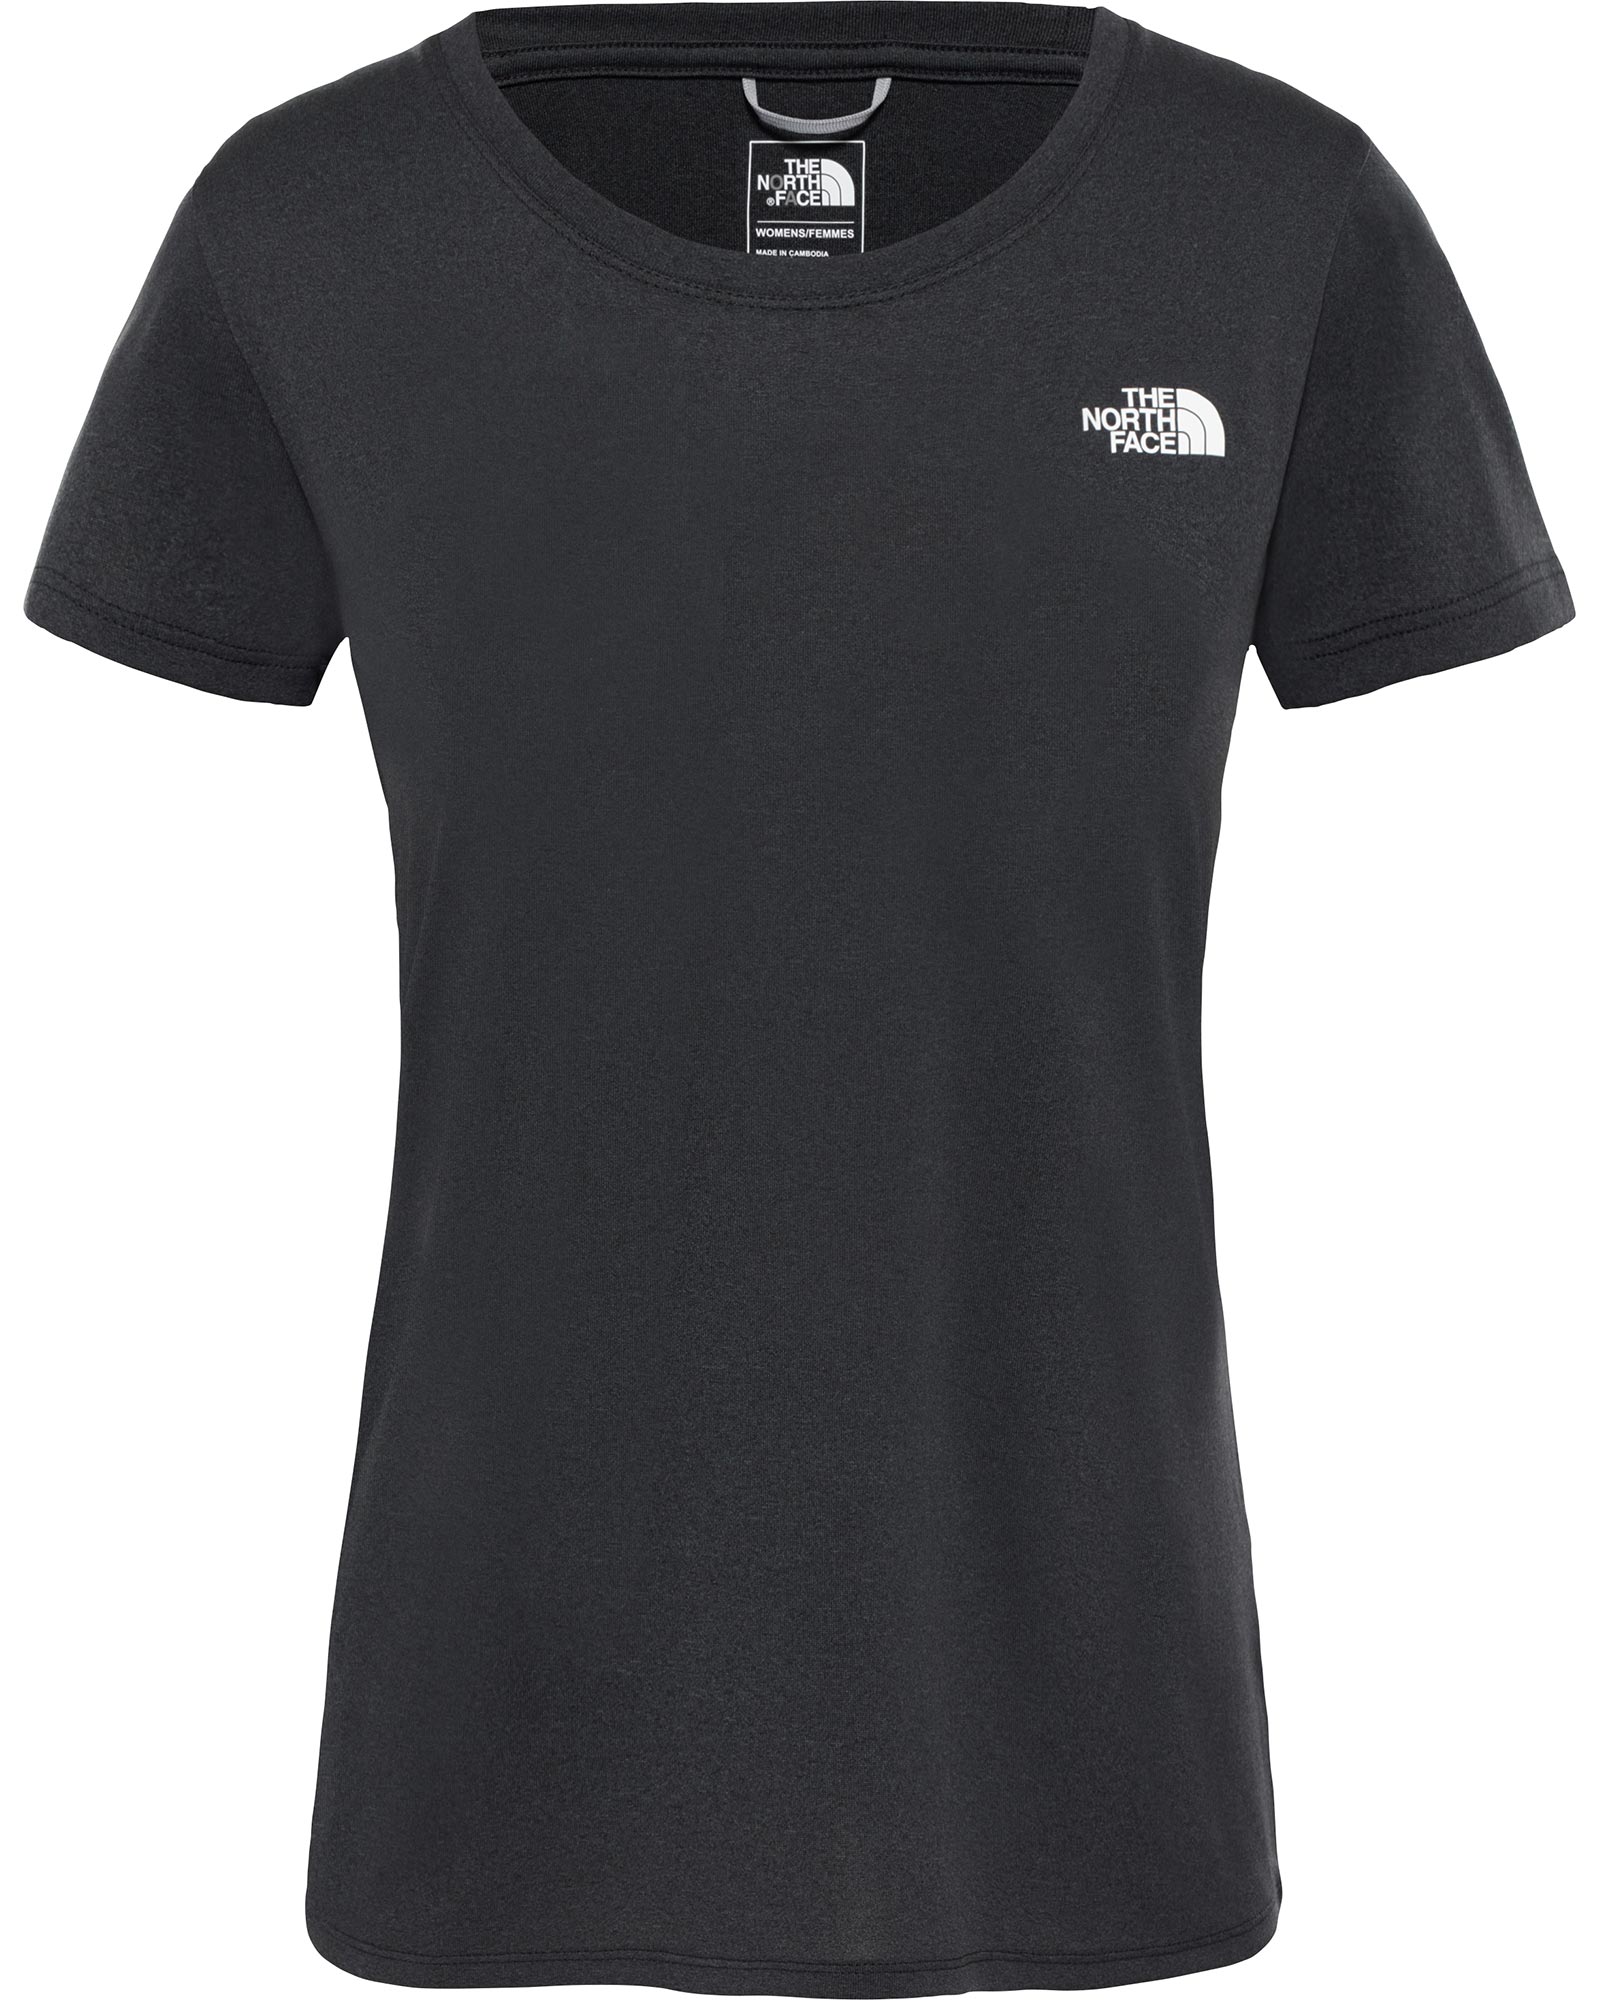 The North Face Reaxion Amp Women’s Crew T Shirt - TNF Light Grey Heather L